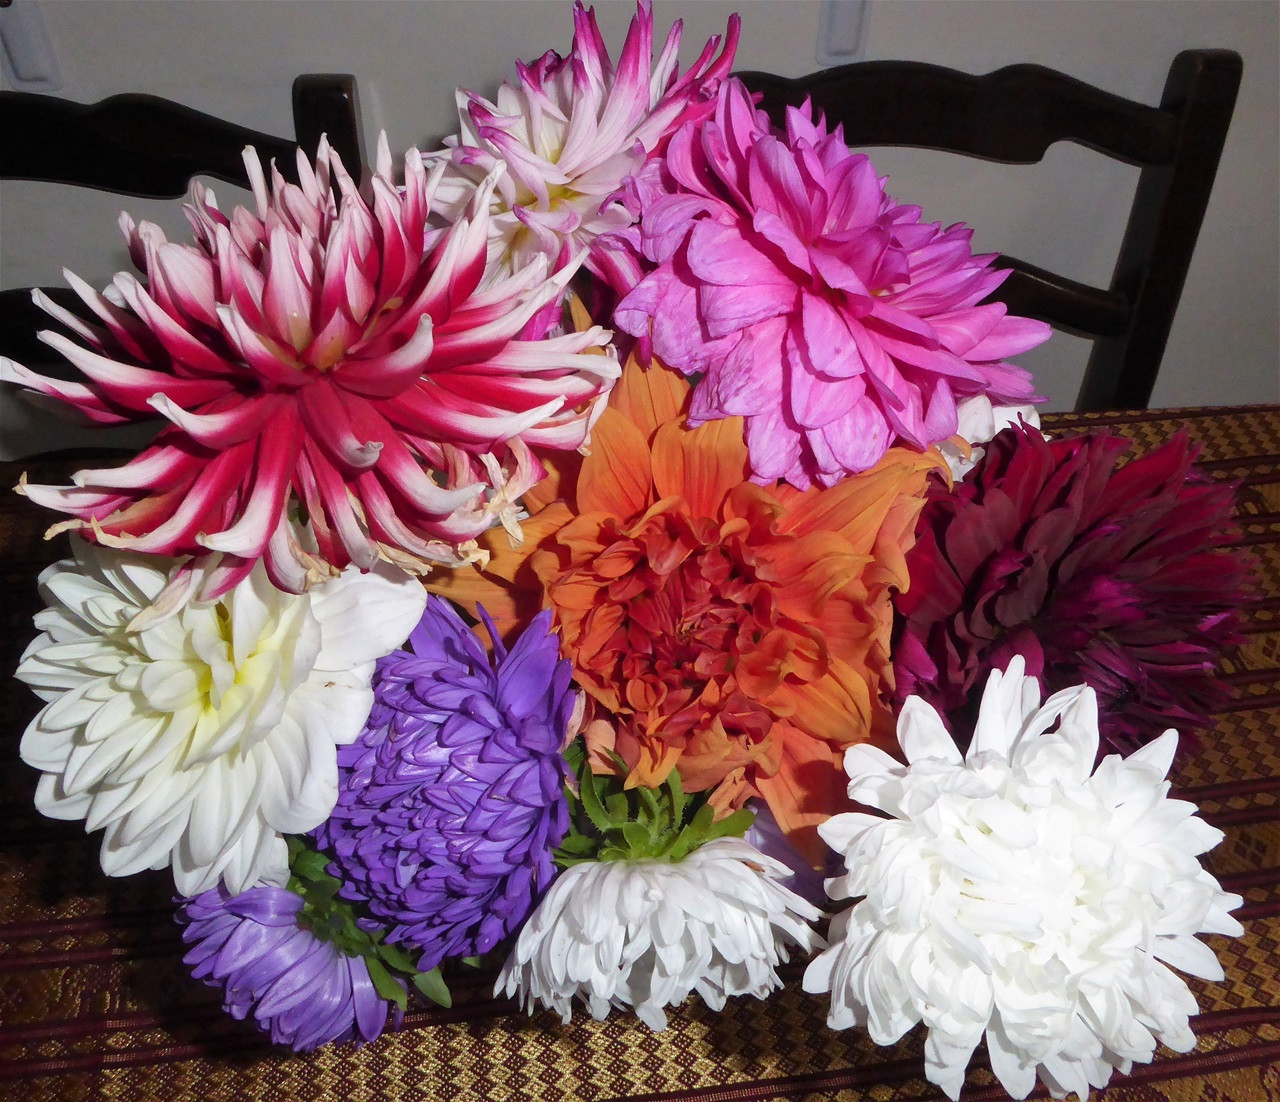 gladiolus vase of september 2017 www alittlebitofsunshine co uk in and these are some of our dahlias and asters not as they were displayed but as they are now in their vase on the table this is where i finish for this